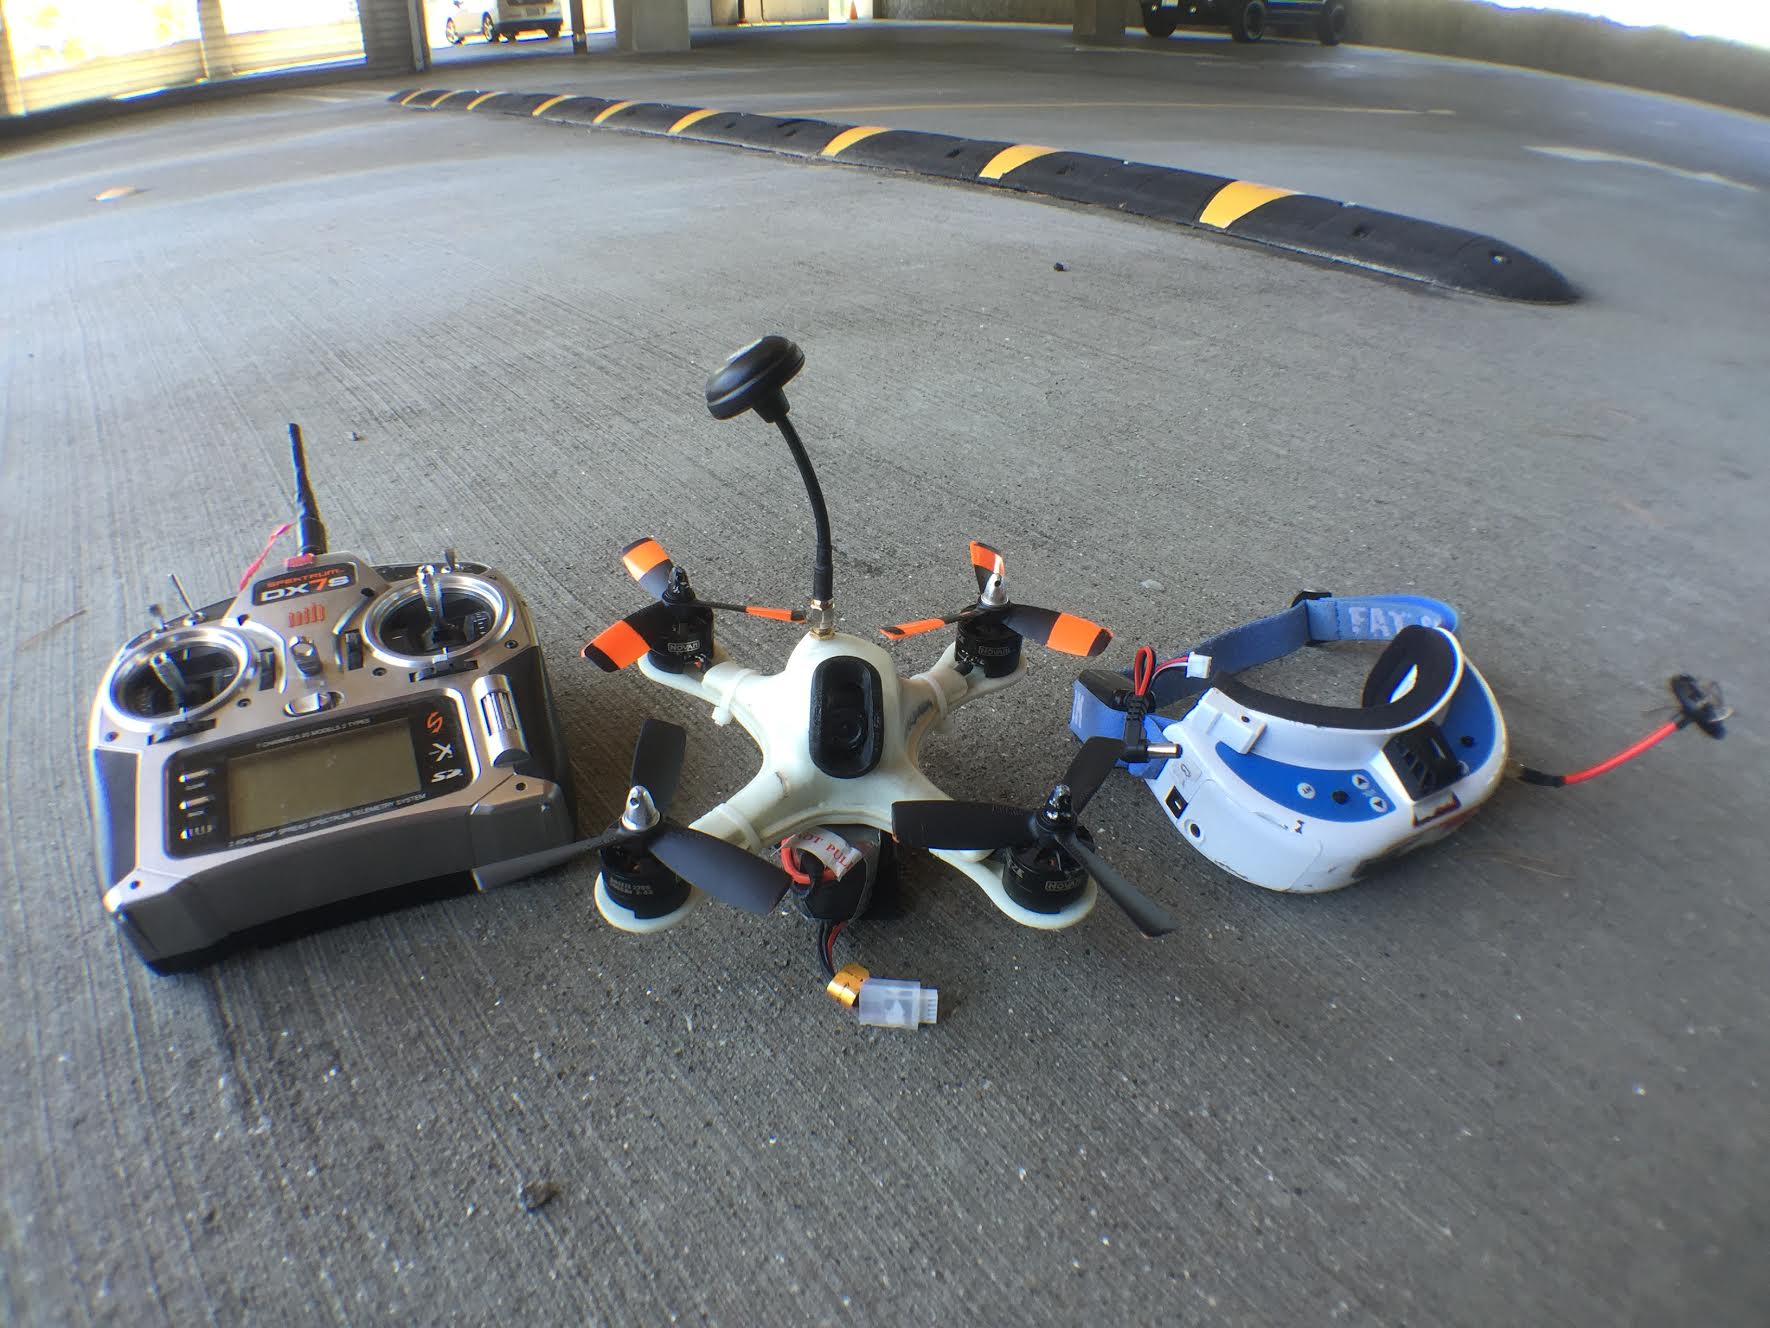 FPV drone to increase as barriers to live broadcast are broken down